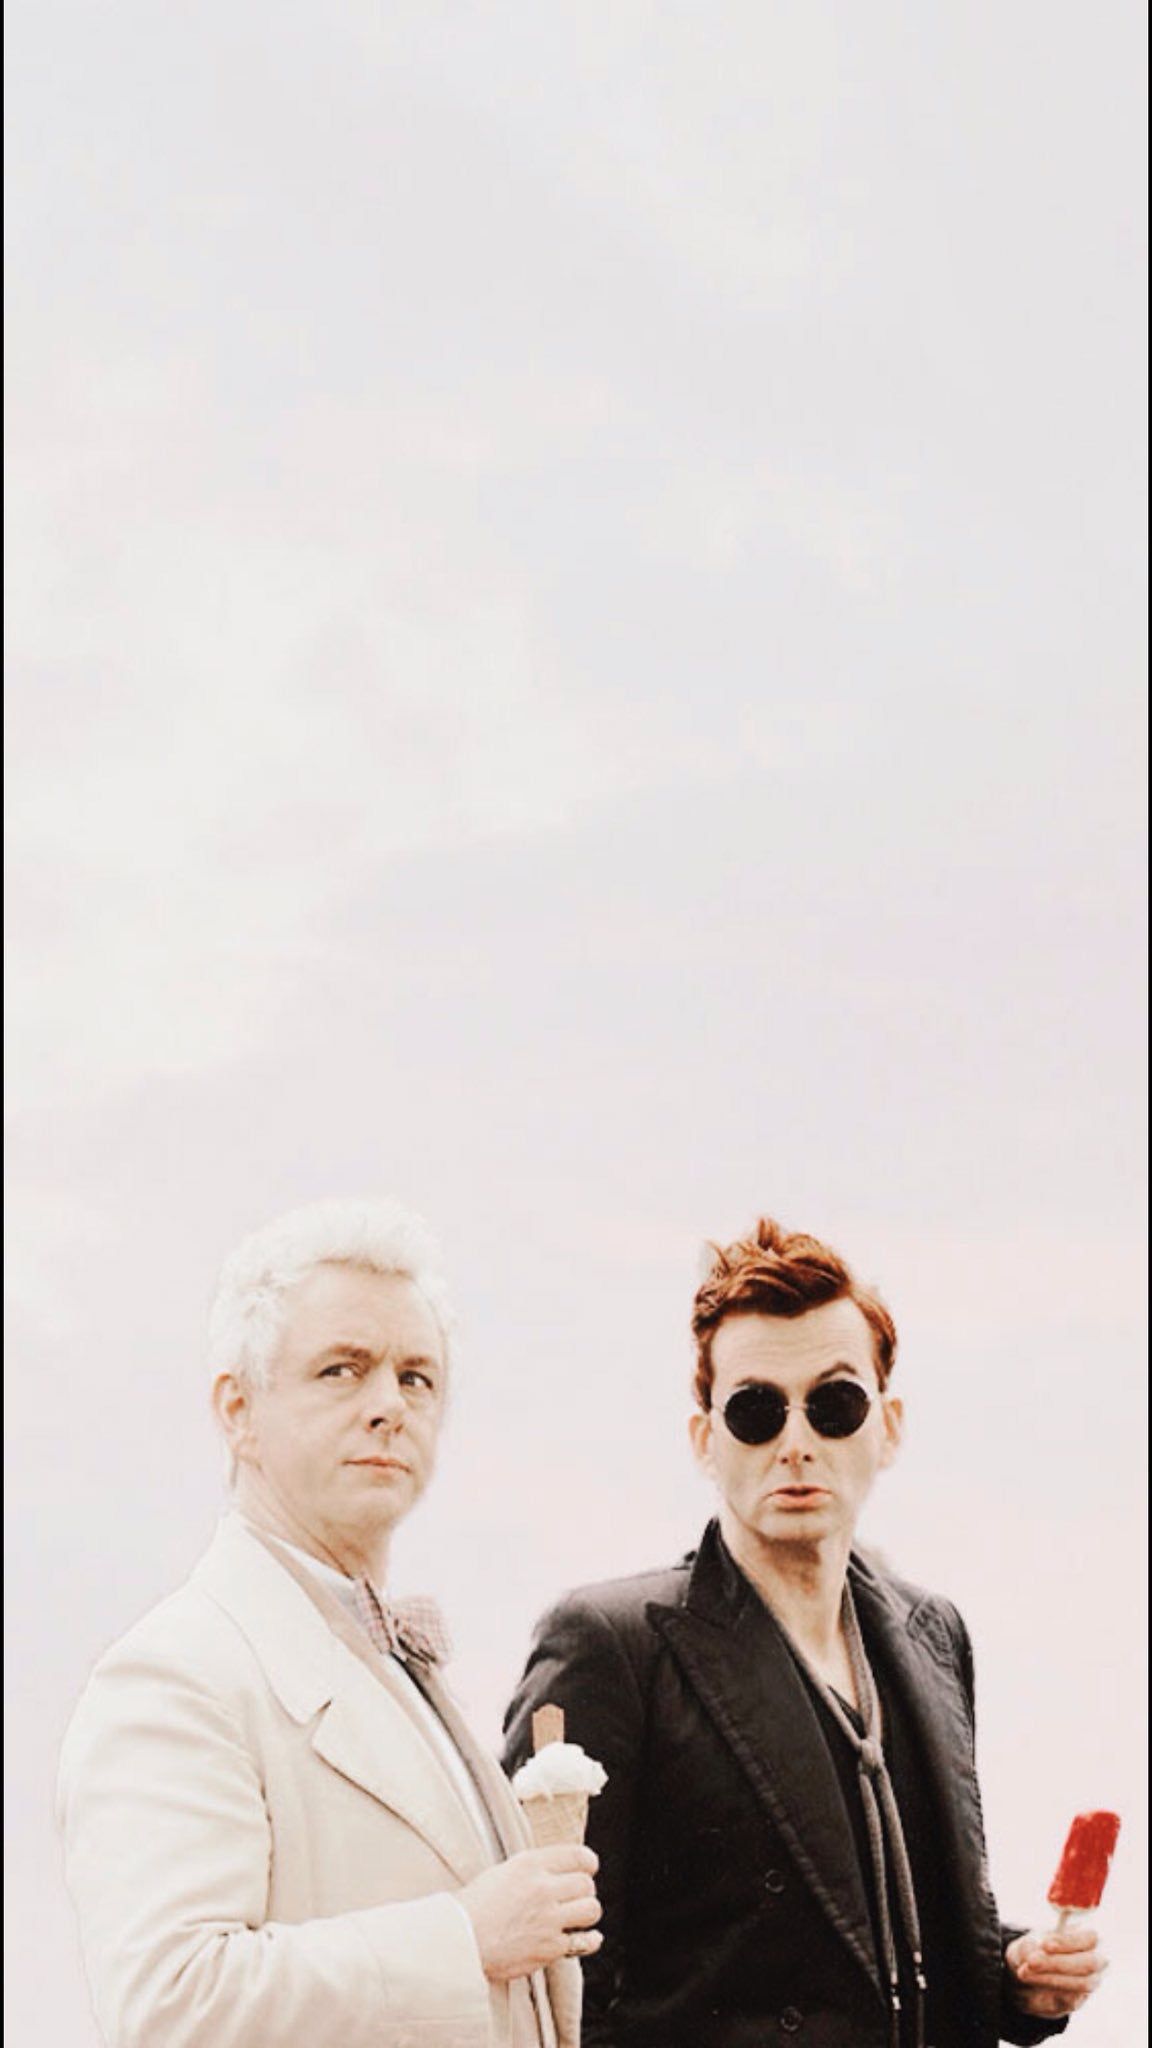 i made some of my good omens art into some phone w  Tumbex